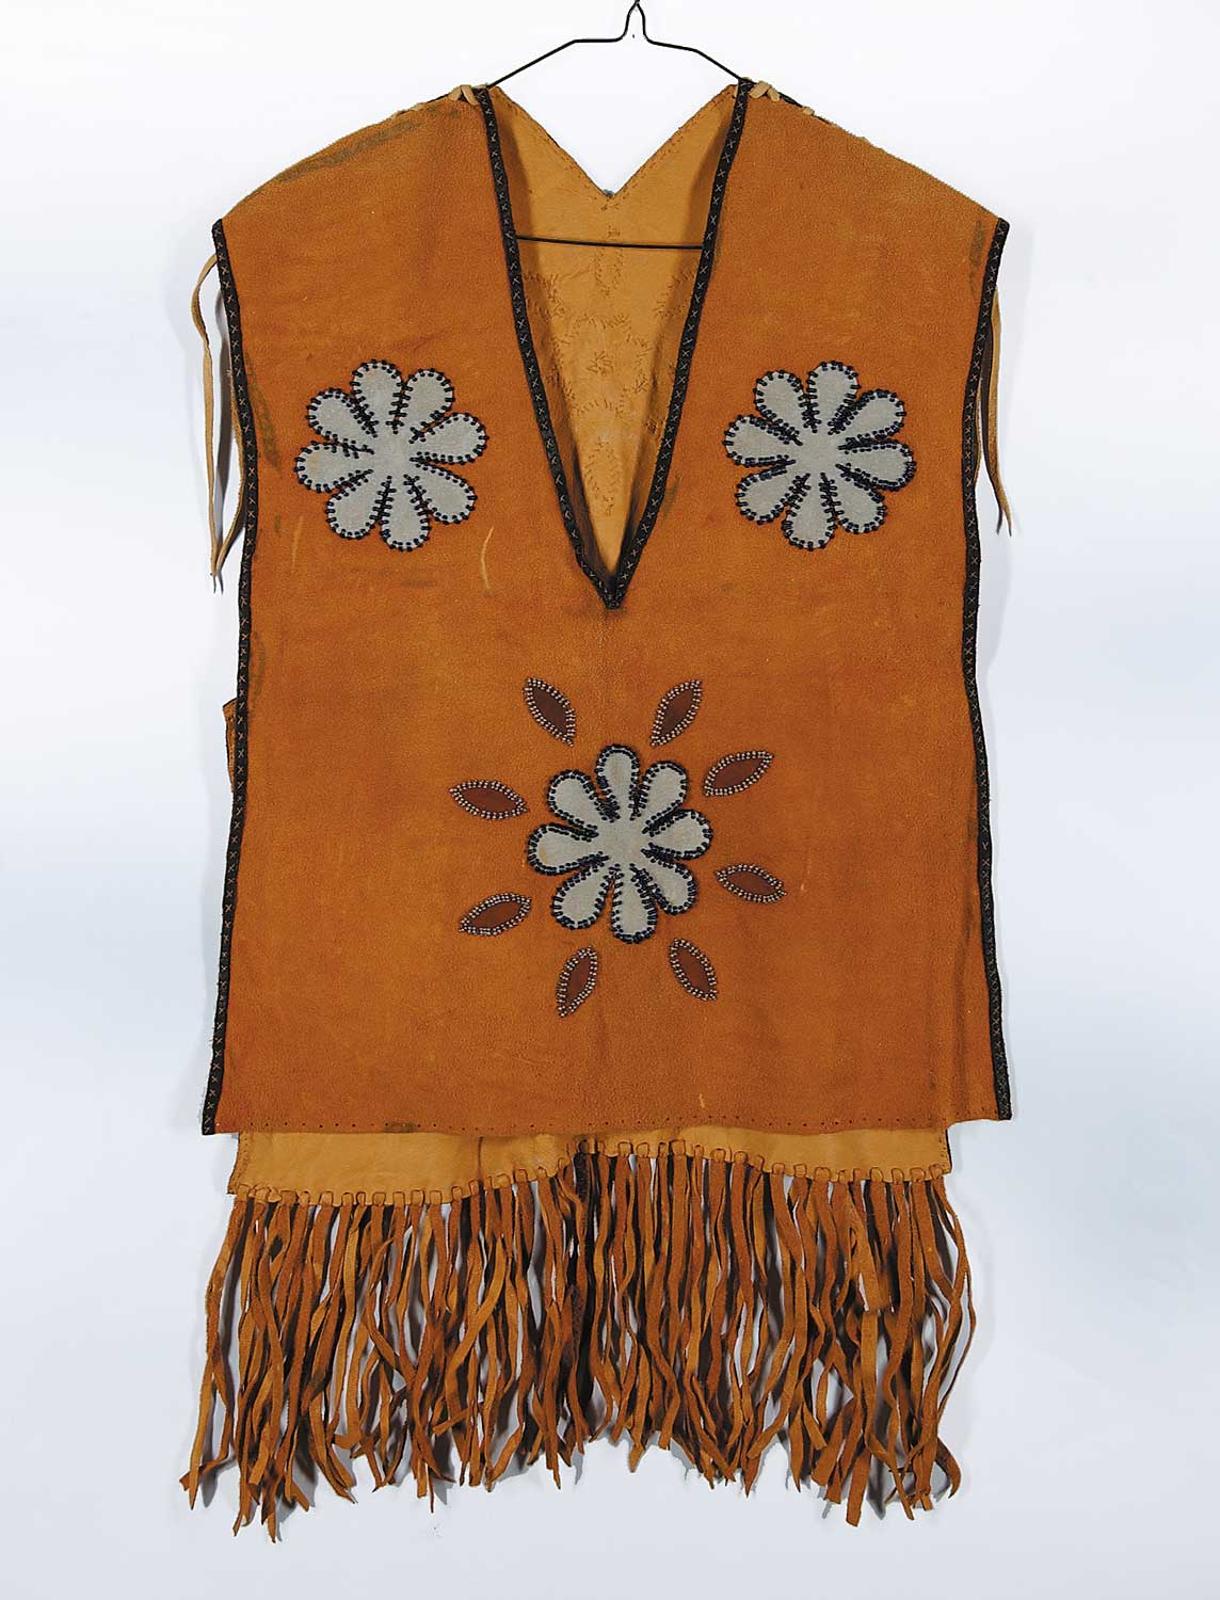 Robert Charles Aller (1922-2008) - Untitled - Beaded and Leather Applique Vest